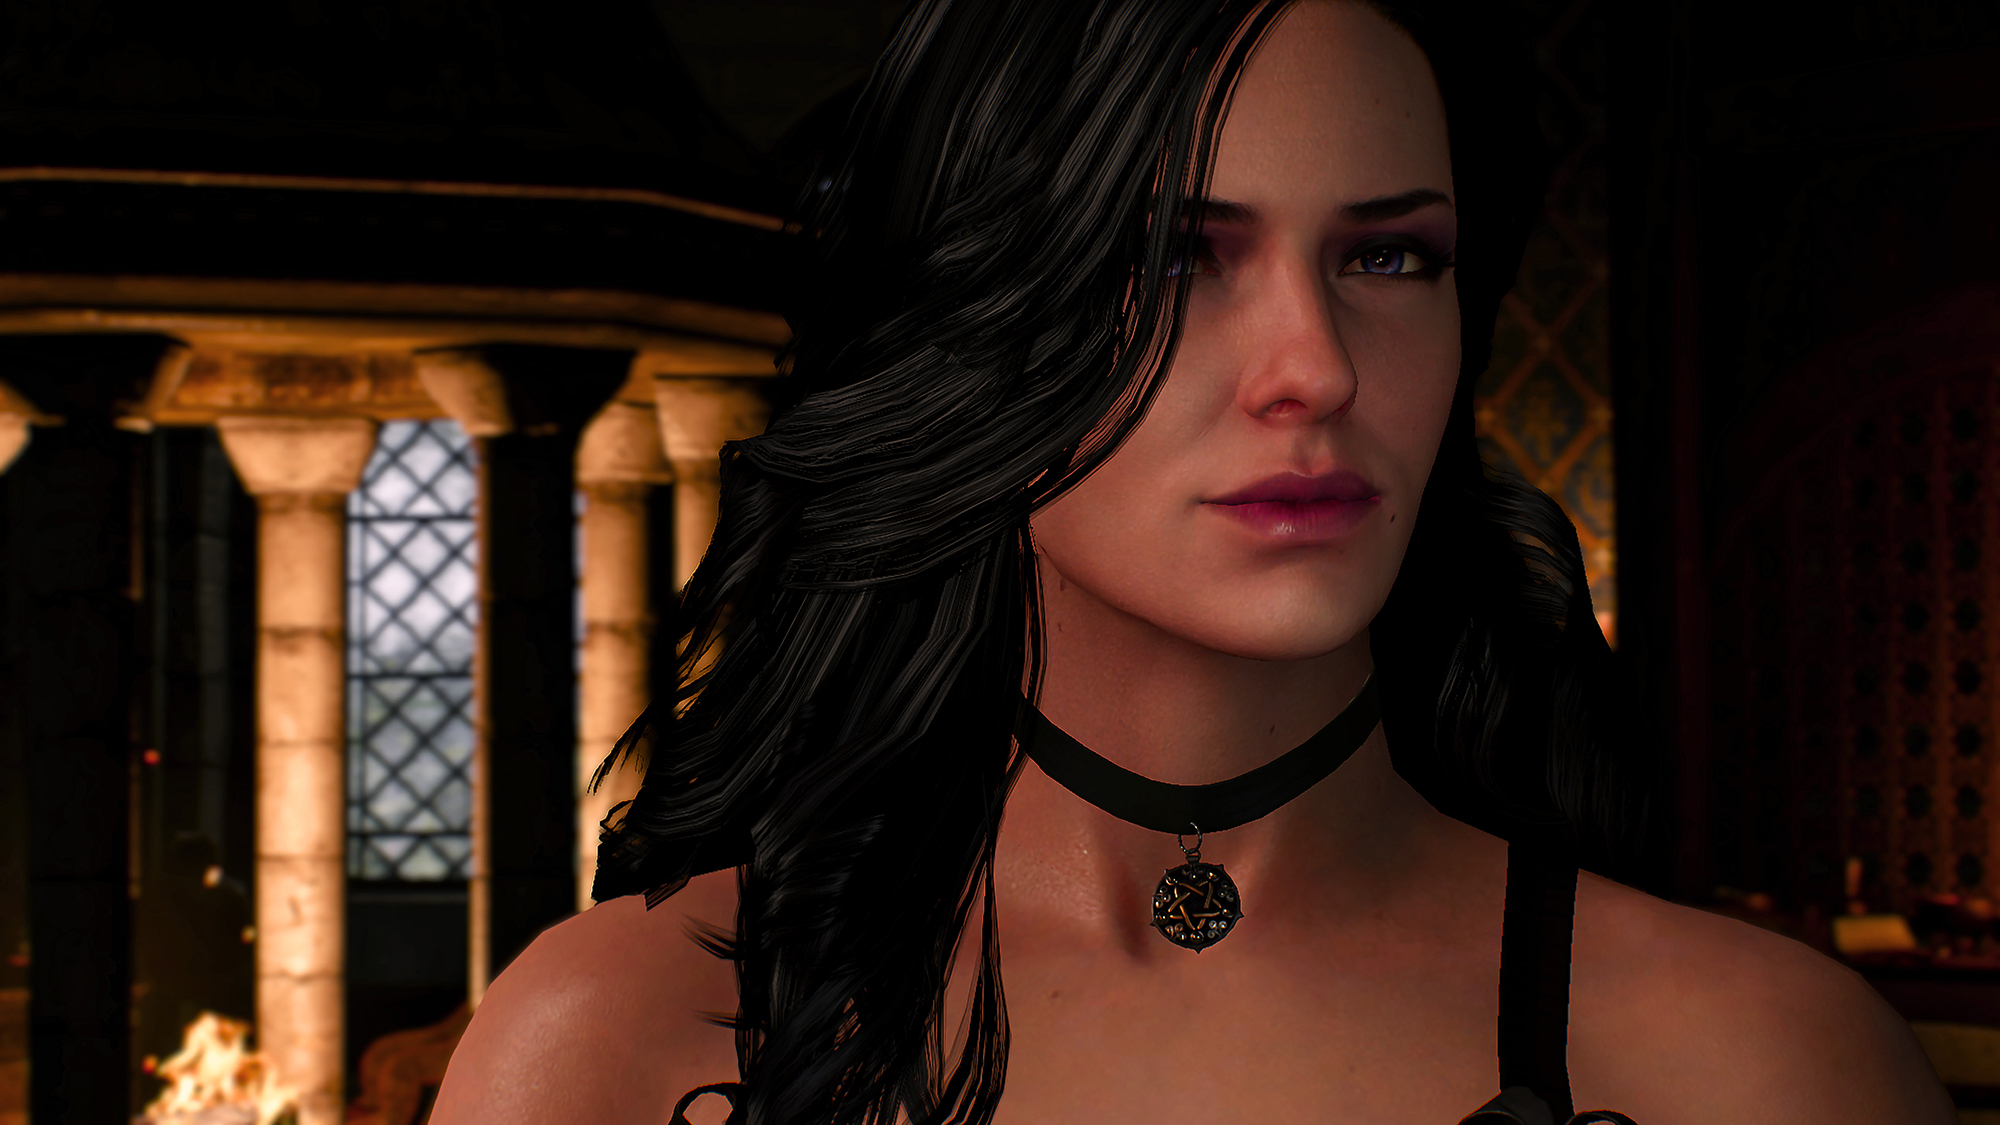 General 2000x1125 The Witcher 3: Wild Hunt Yennefer of Vengerberg CD Projekt RED video games video game girls video game characters screen shot The Witcher